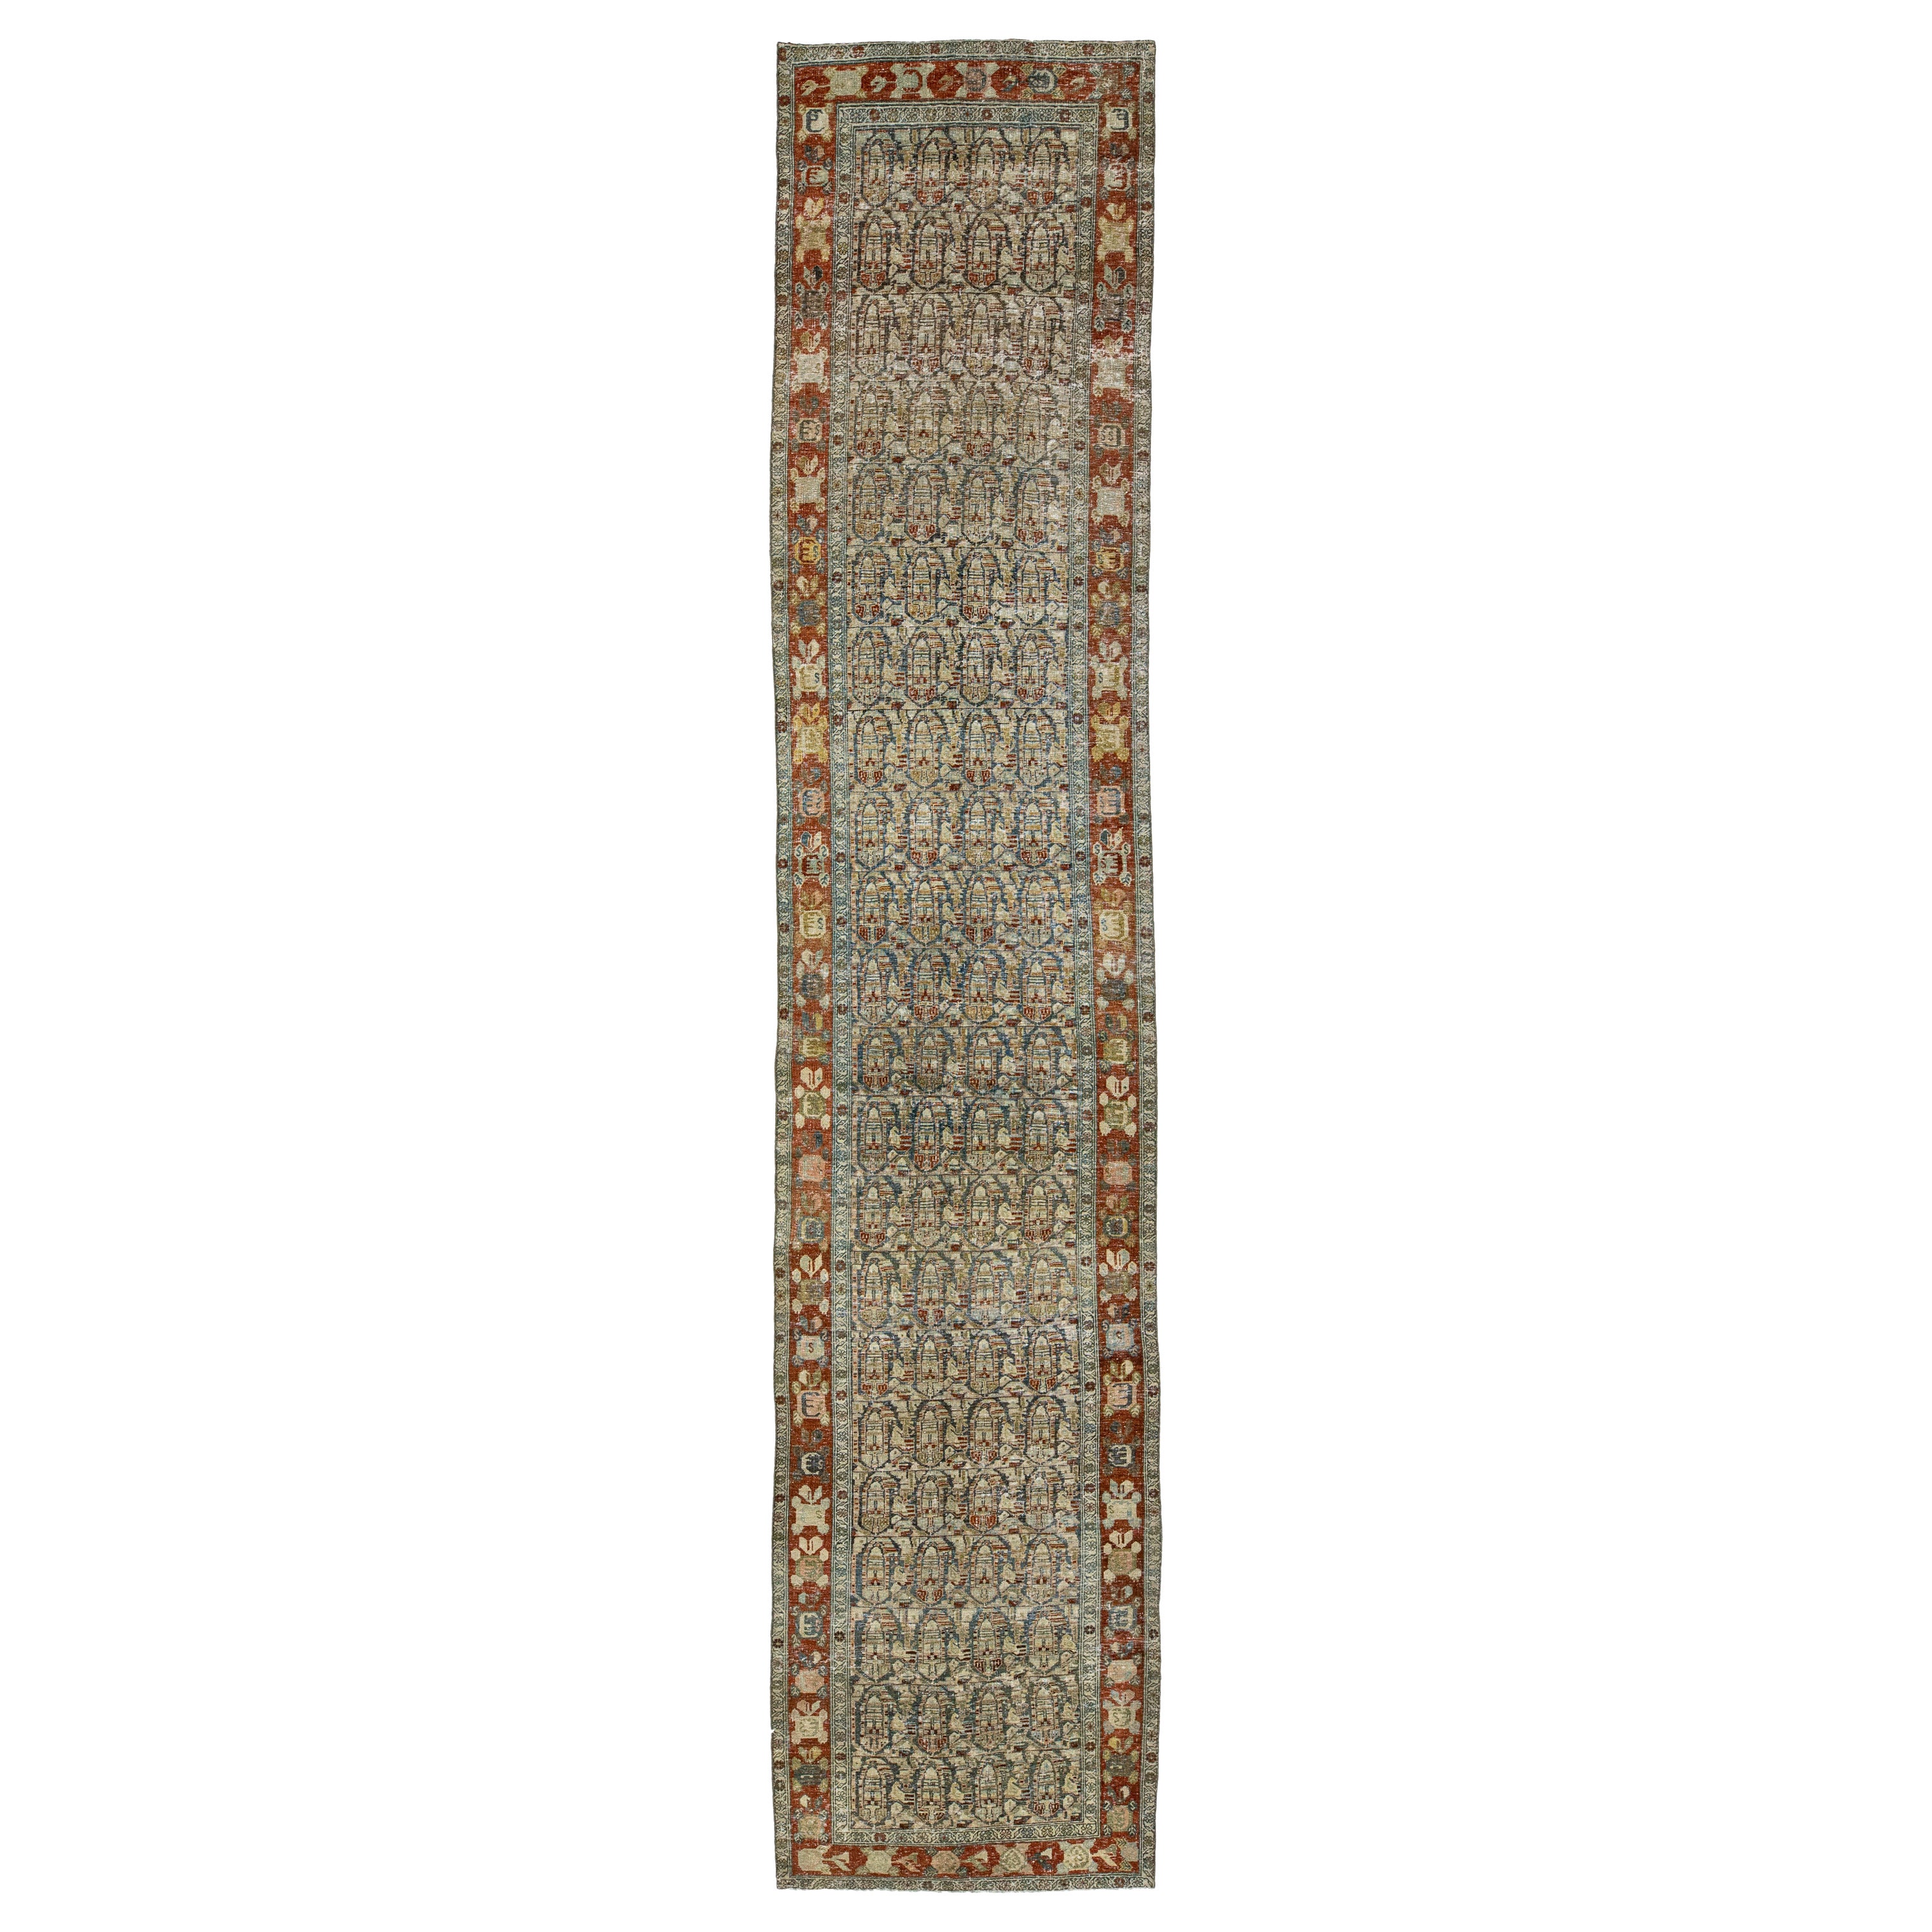 Antique Persian Designed Malayer Wool Runner In Blue